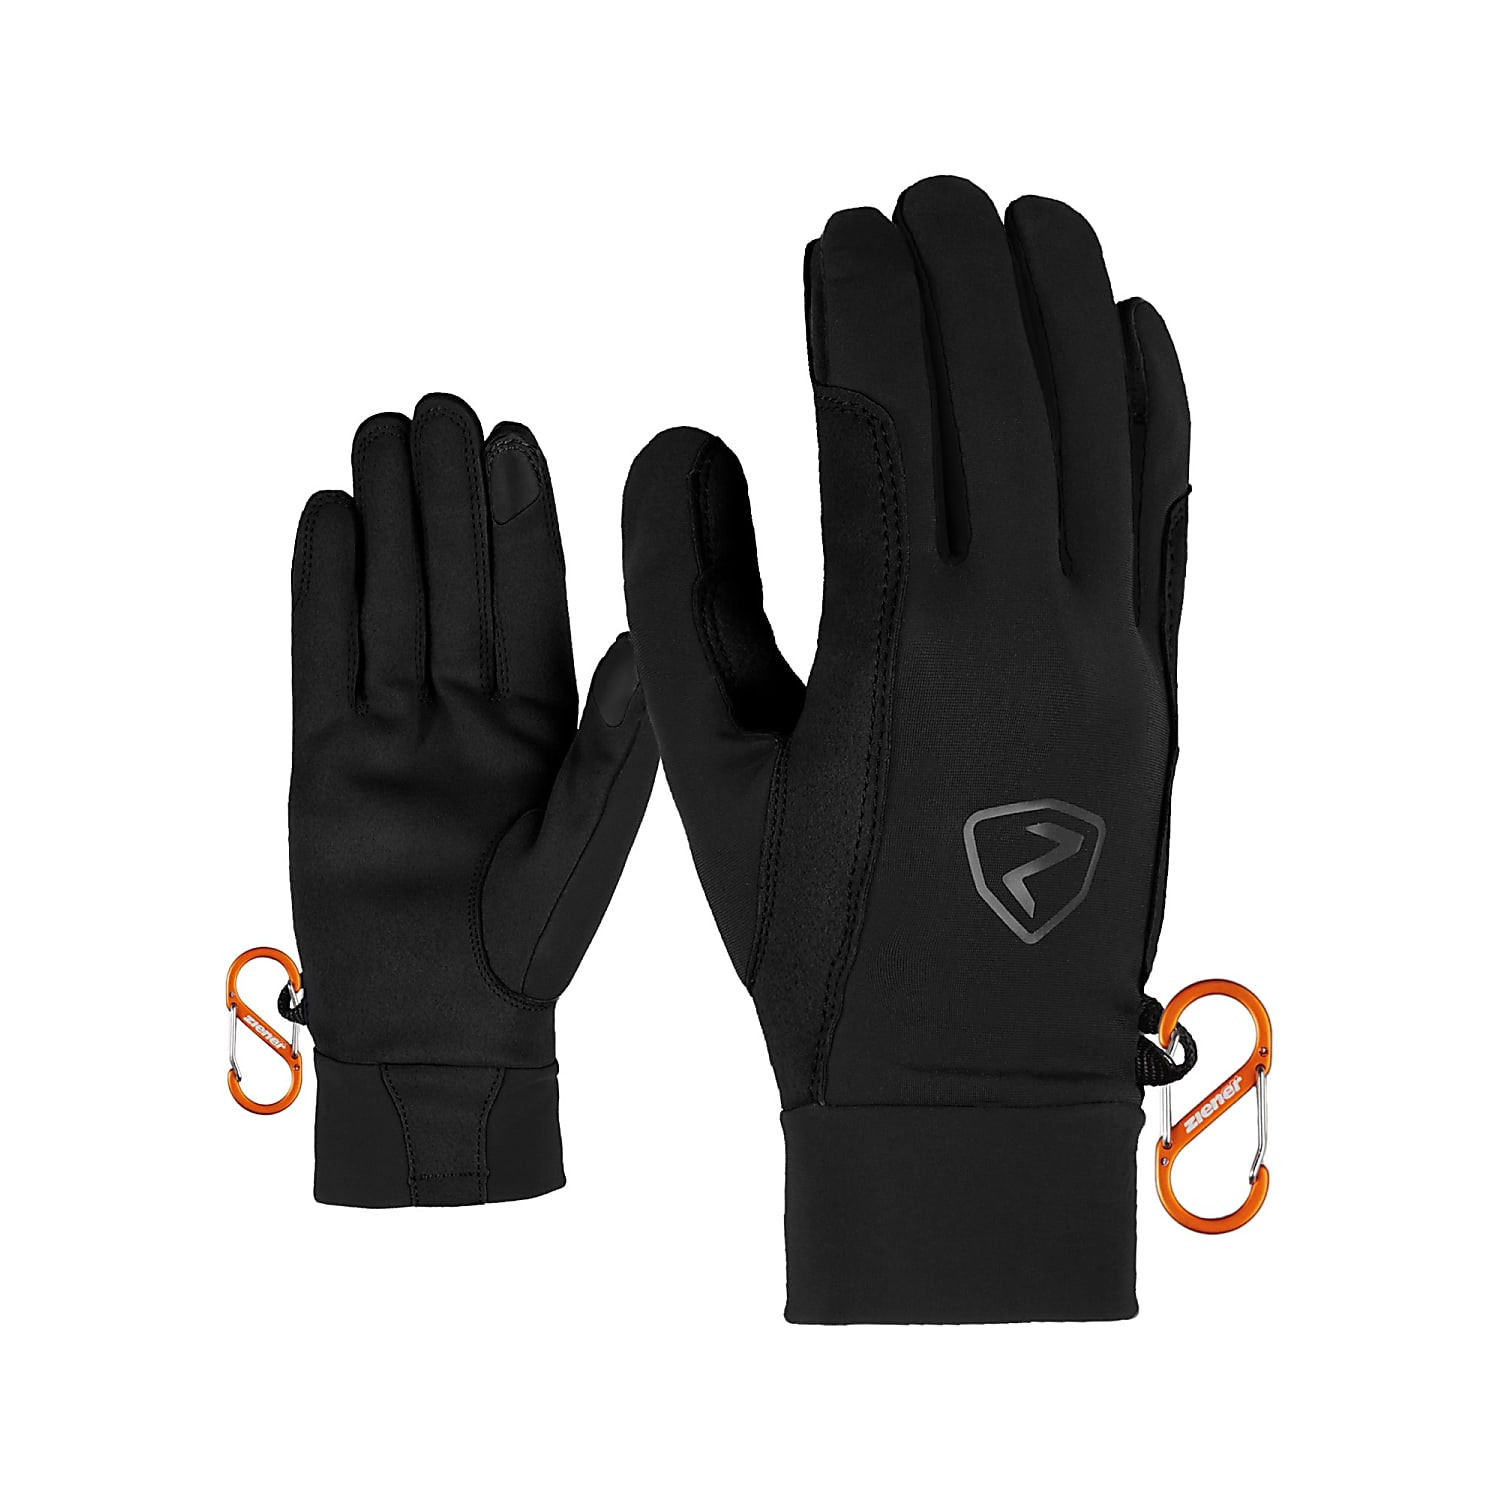 Ziener GUSTY TOUCH GLOVE, Black - Fast and cheap shipping